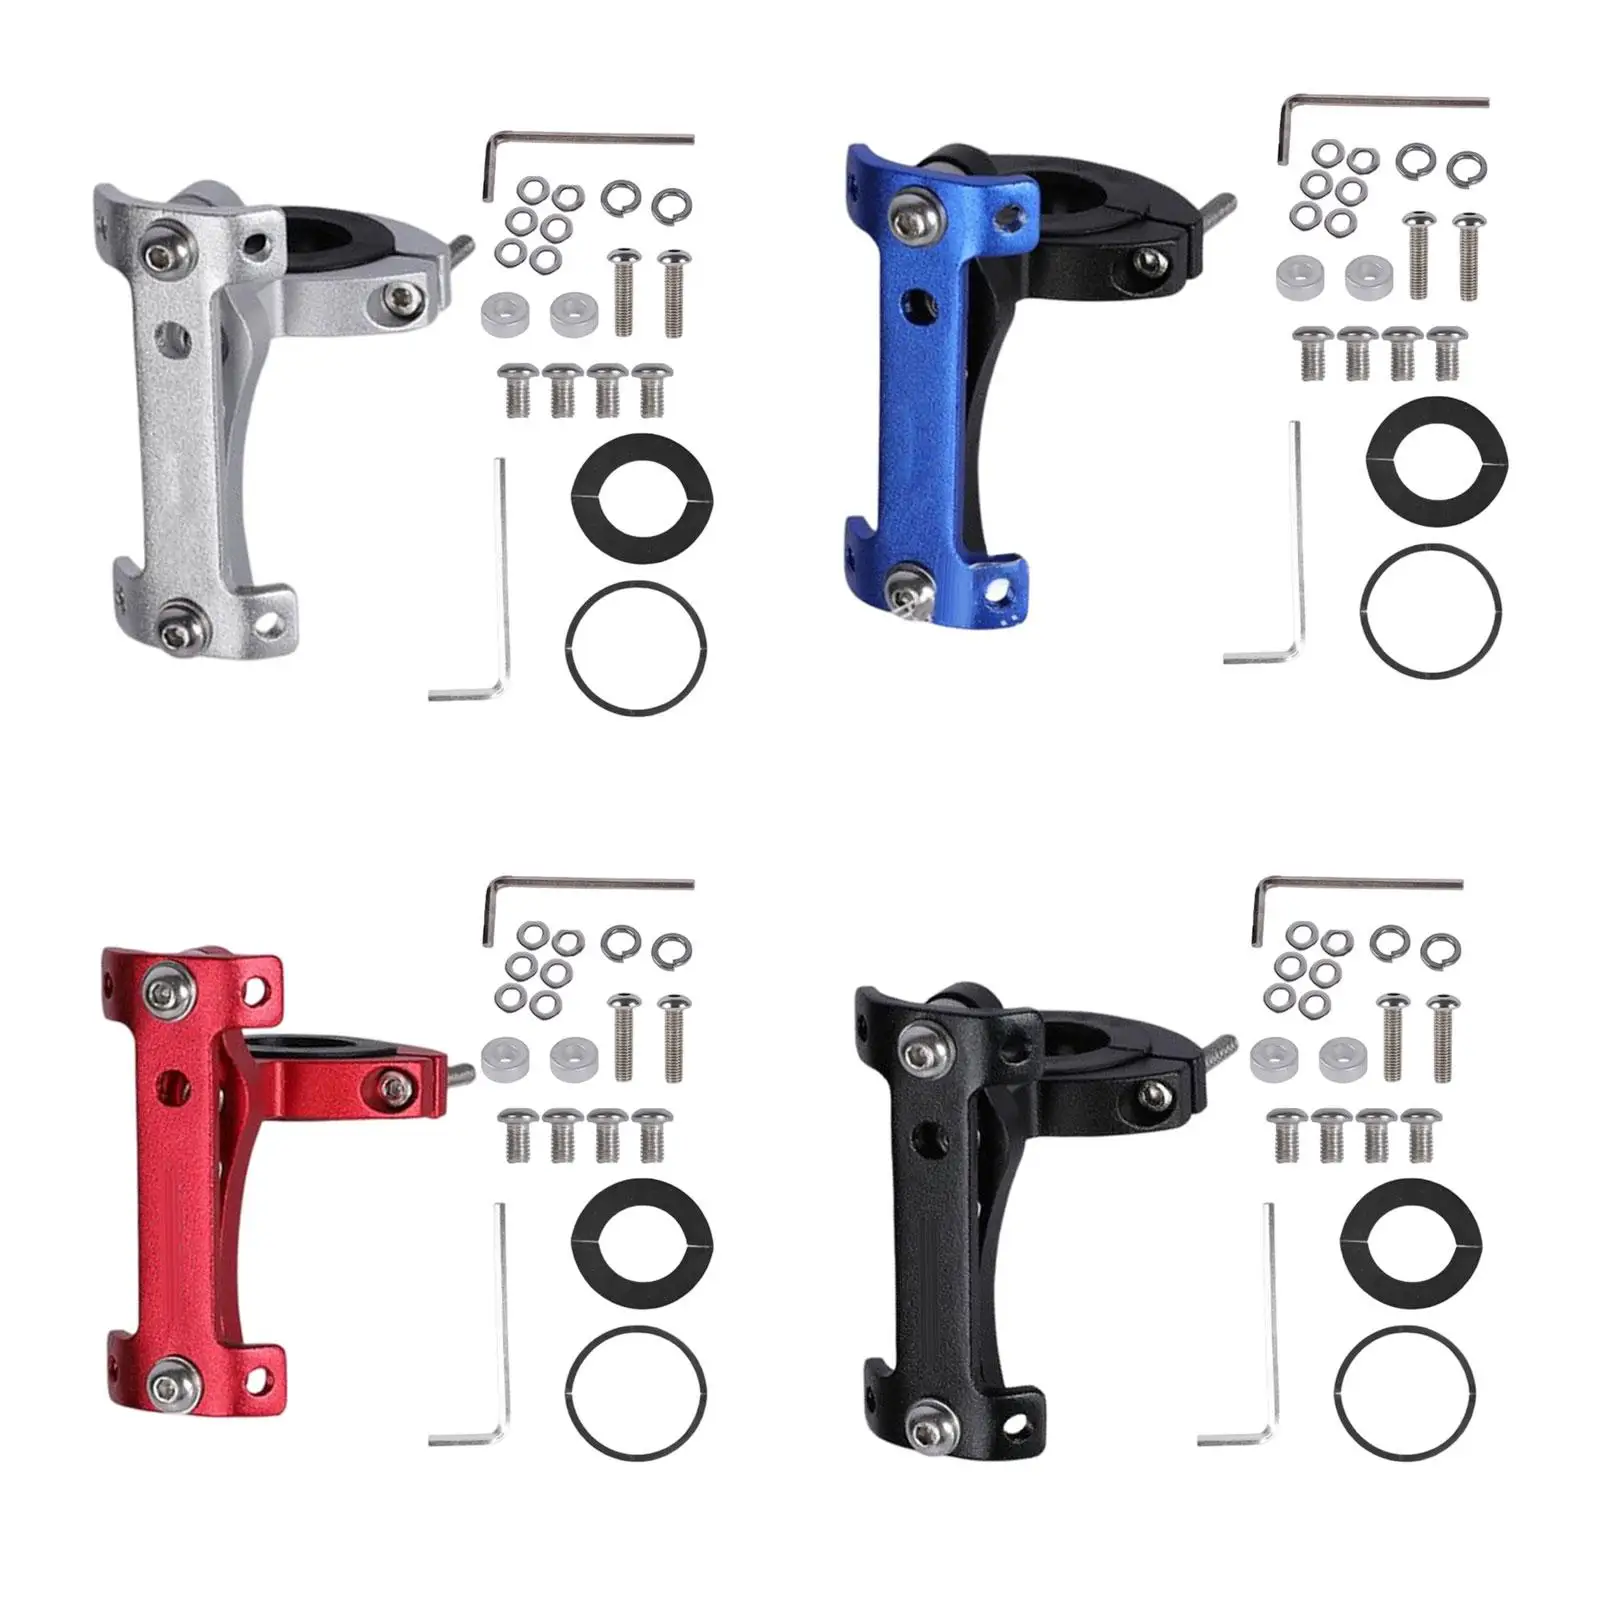 Multifunction Bike Double Water Bottle Extension Rack Seat Rack Adapter Easy to Install Stable Water Bottle Rack for Accessories